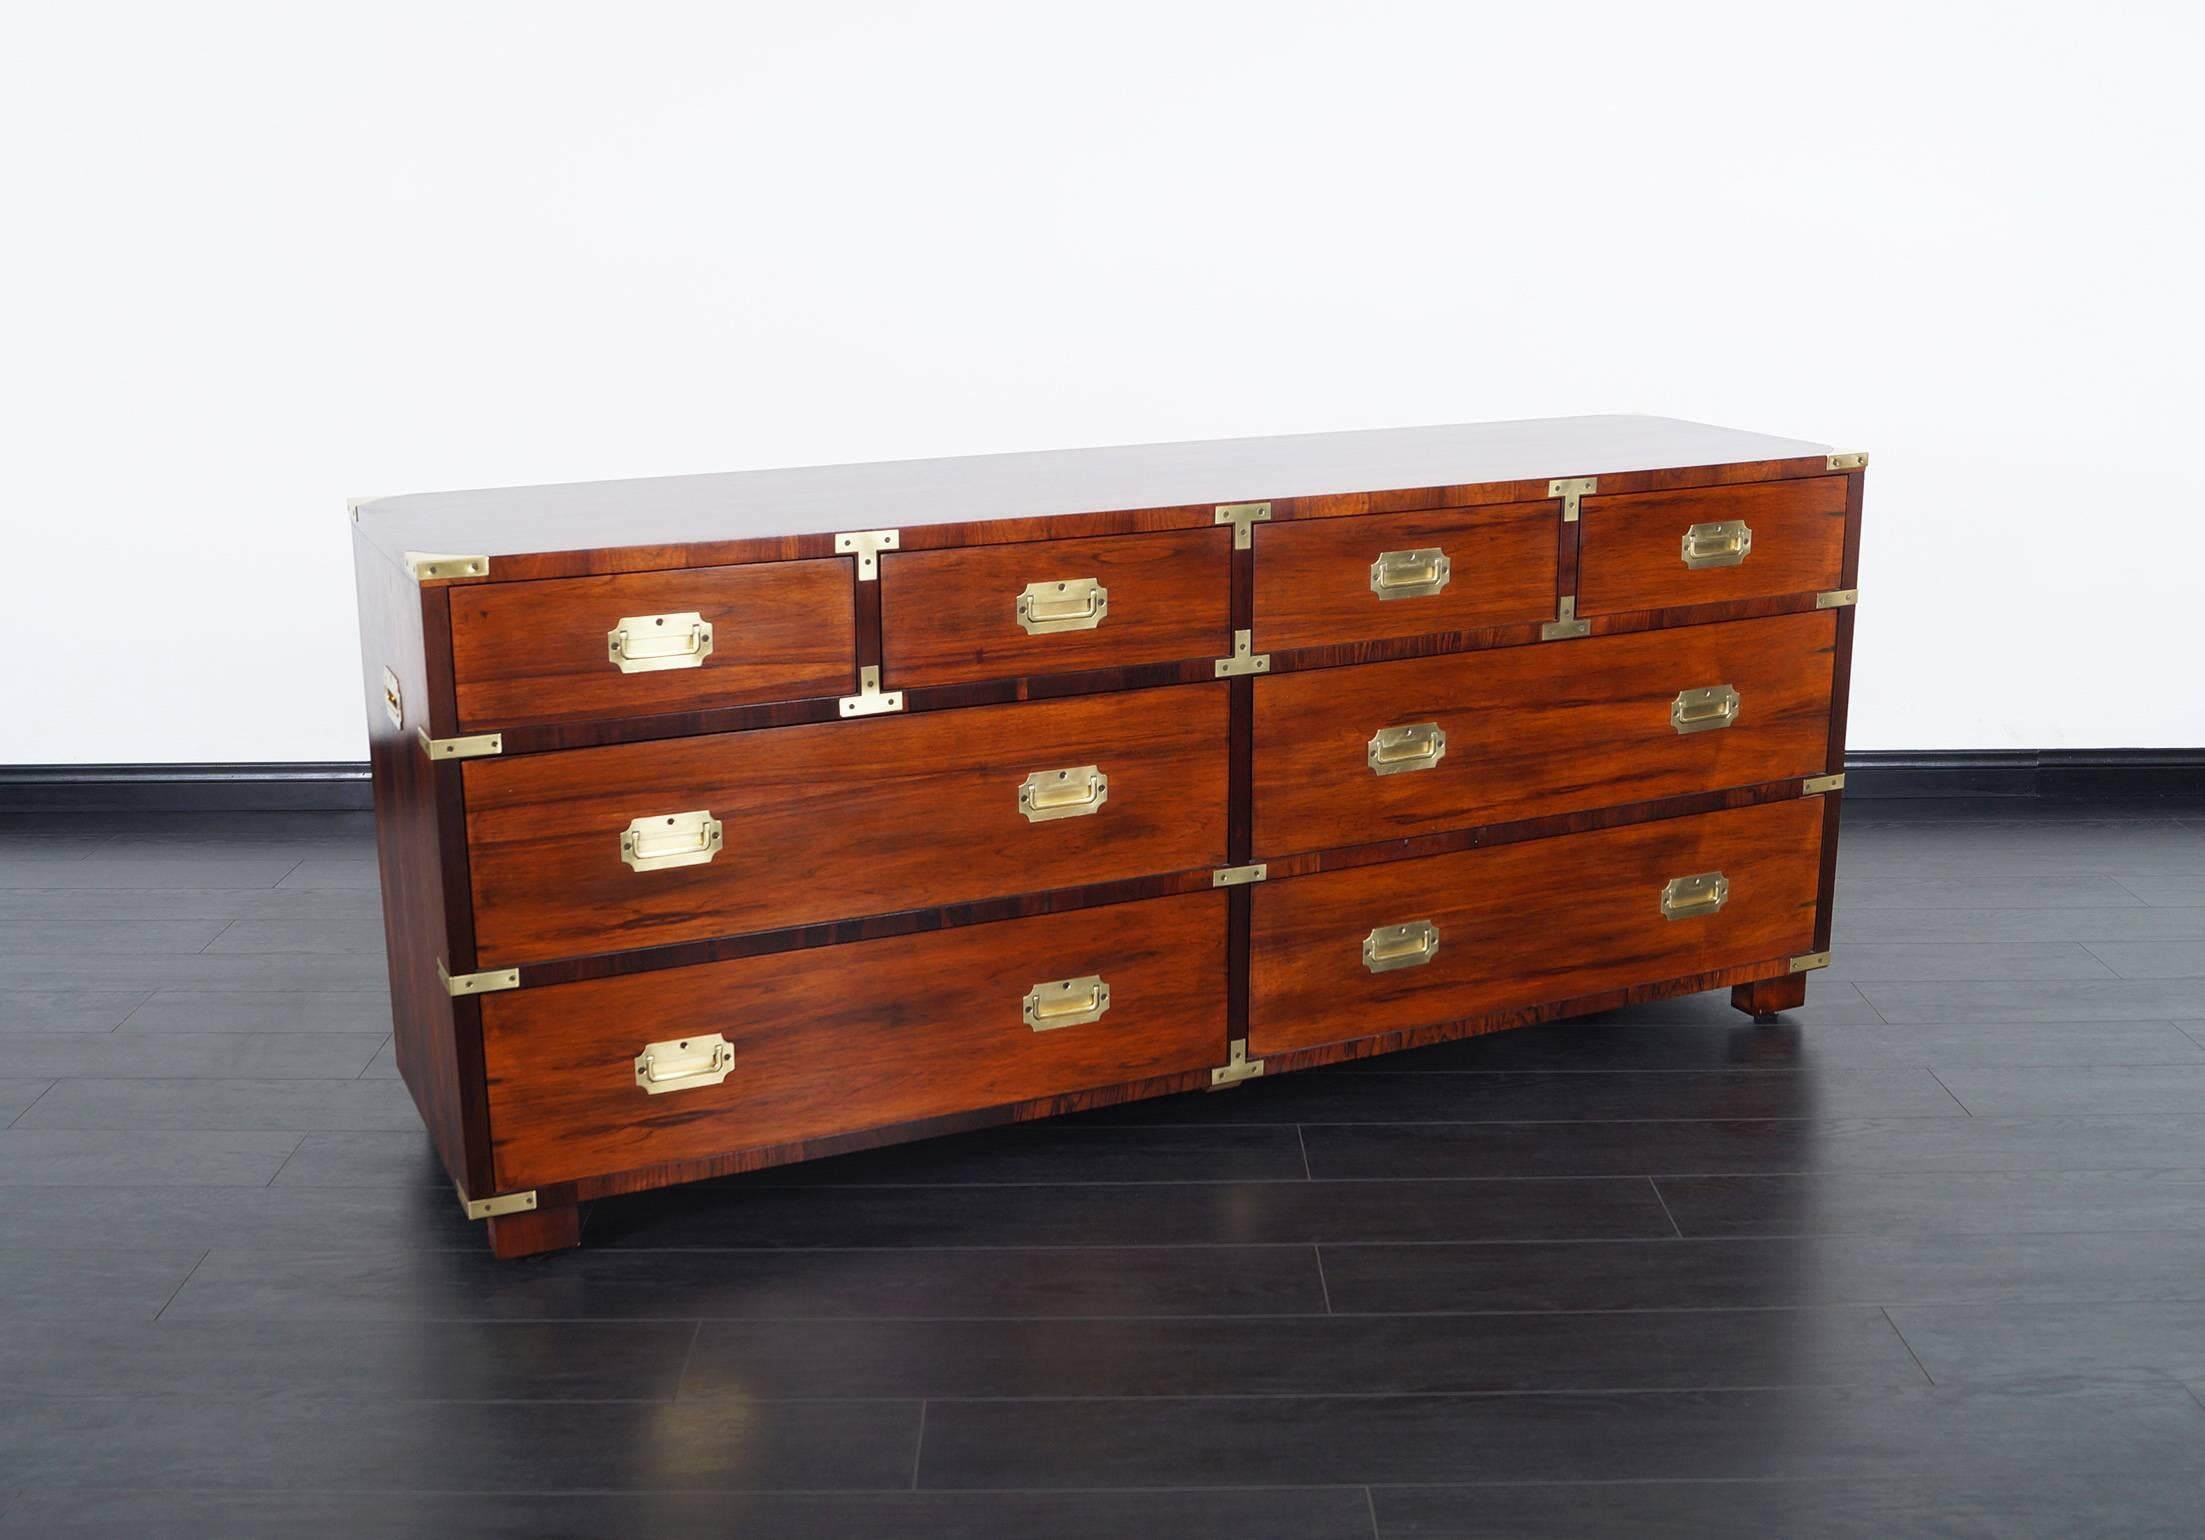 Stunning Brazilian rosewood Campaign style dresser by John Stuart. Features eight drawers with solid brass hardware. This is absolutely one of the most well crafted Campaign style dresser ever made, with no expense spared.